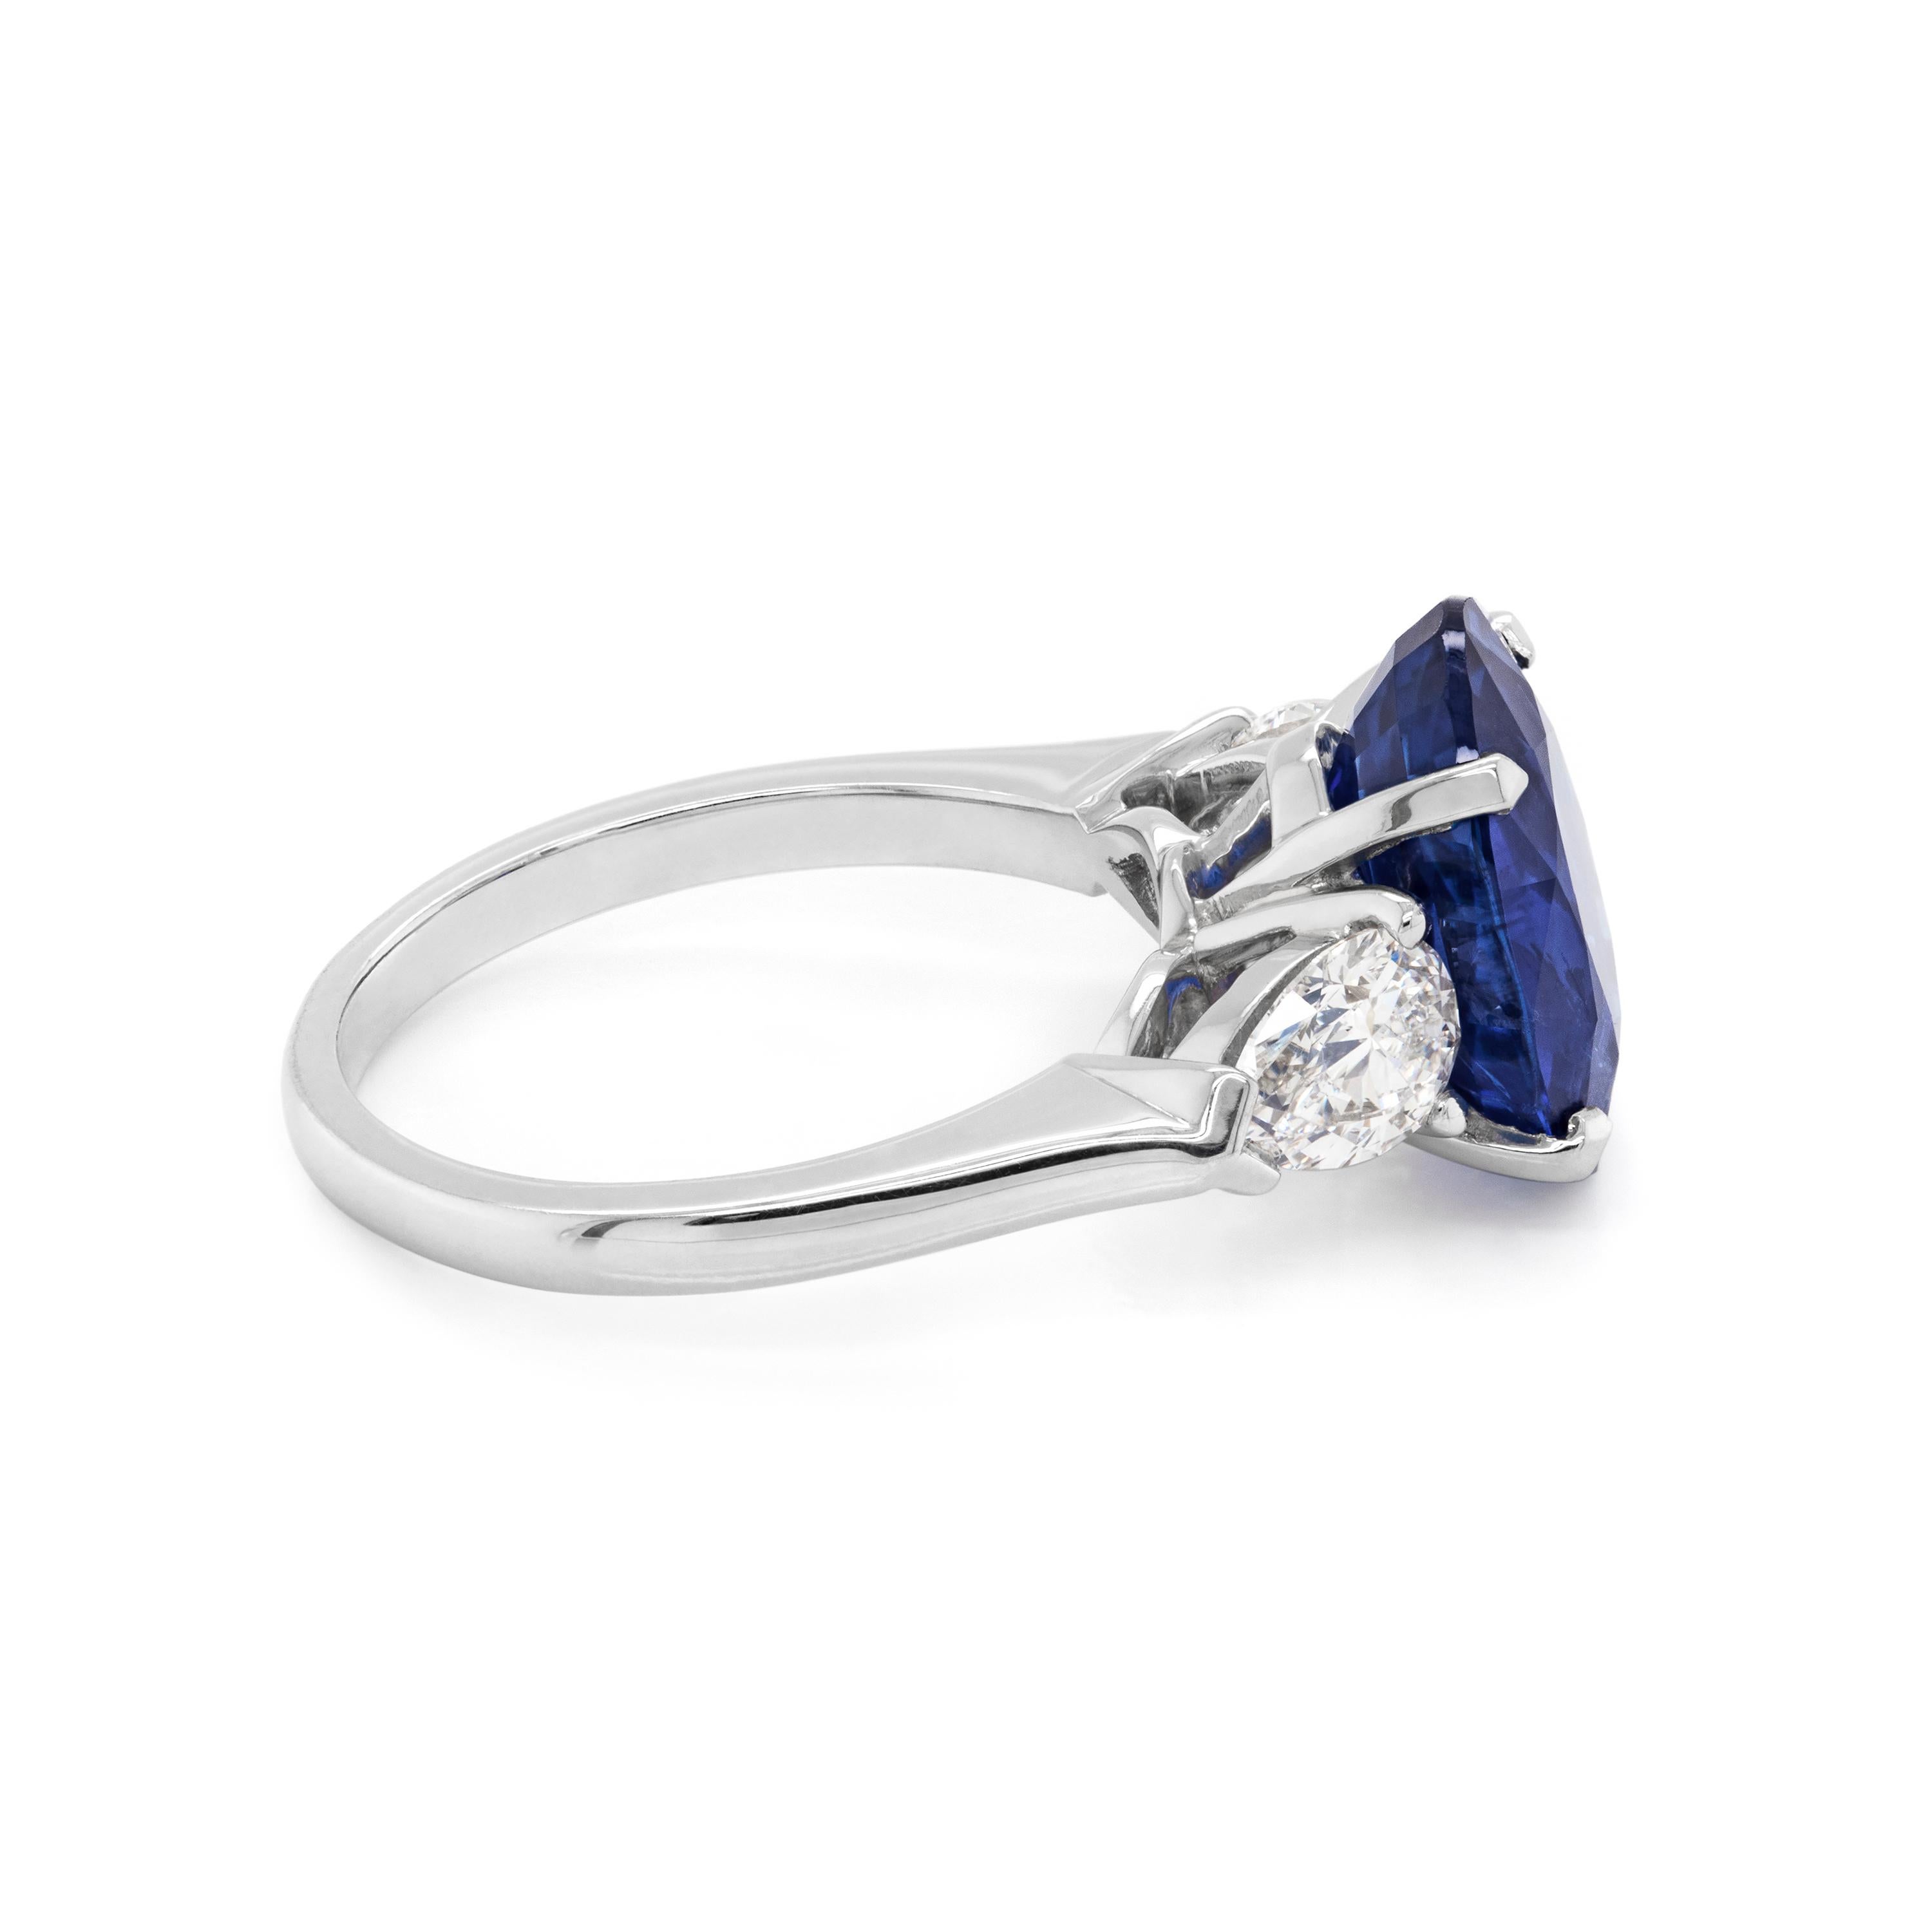 An absolutely exquisite engagement ring featuring a royal blue oval sapphire weighing 5.70 carats set in a four claw, open back setting. This incredible stone is accompanied by a pear shaped diamond on either side with one certified 0.51ct E VVS1